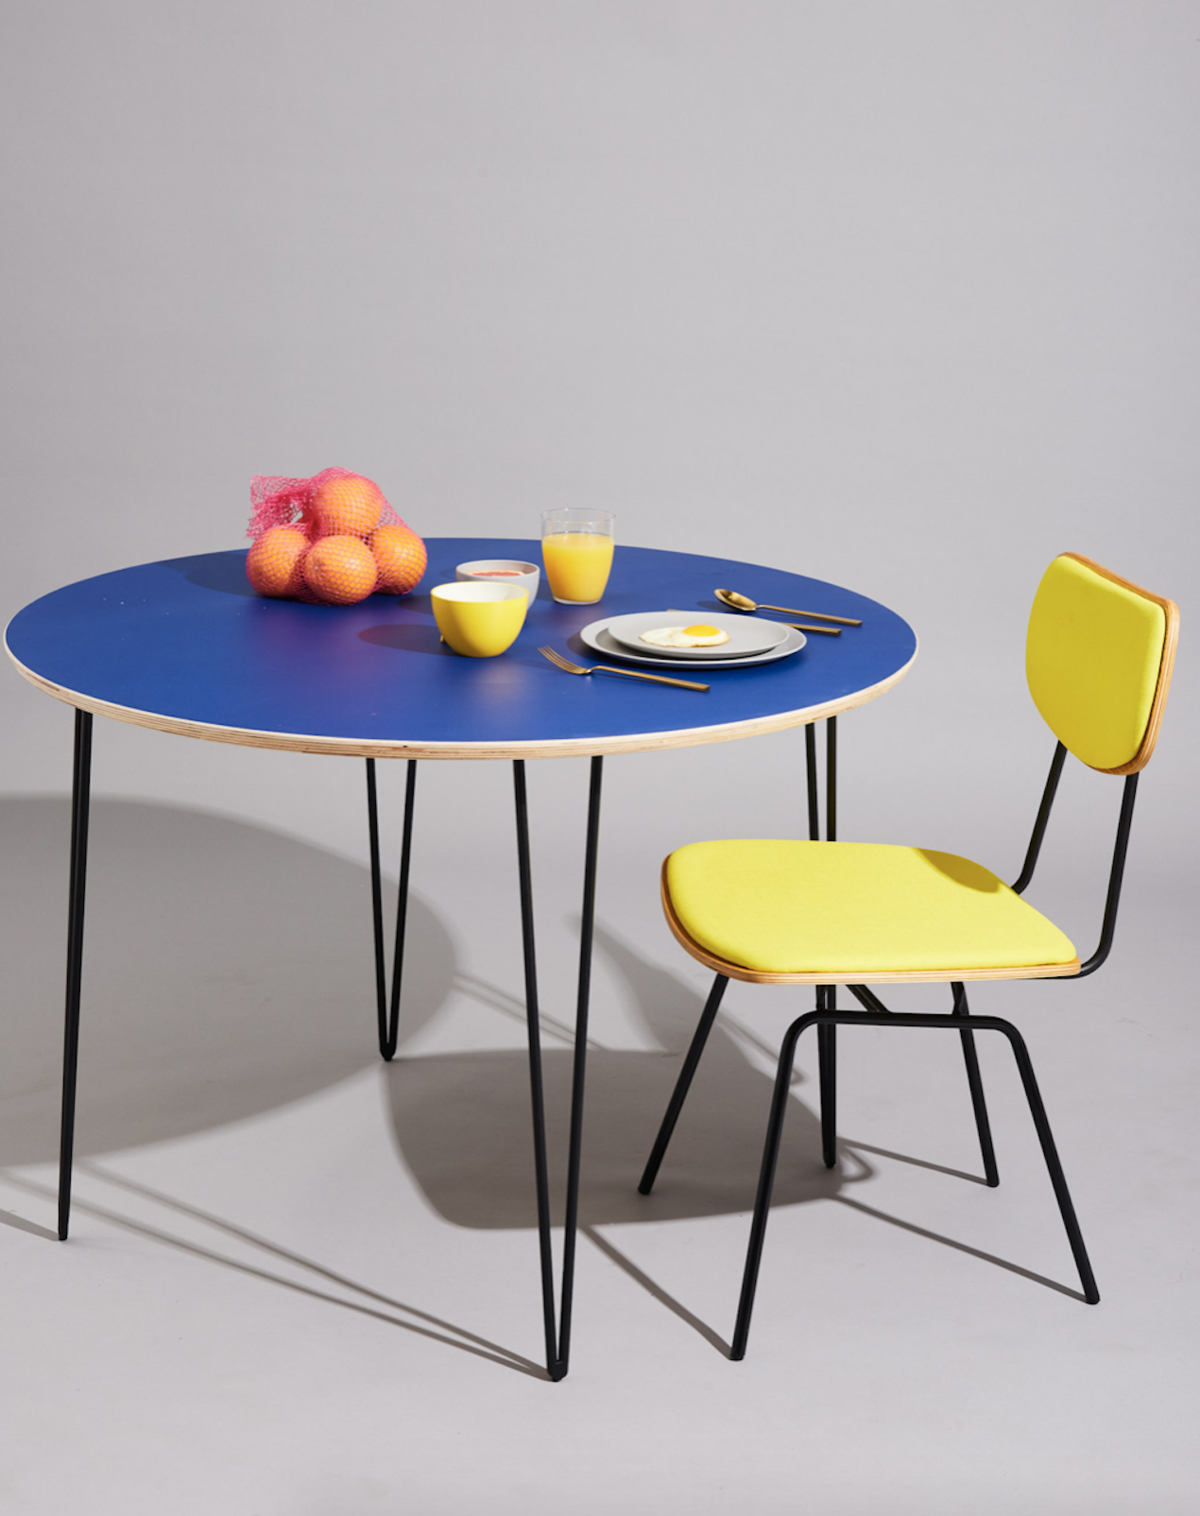 The Kobe dining chair from Inside Weather in Vibrant Yellow